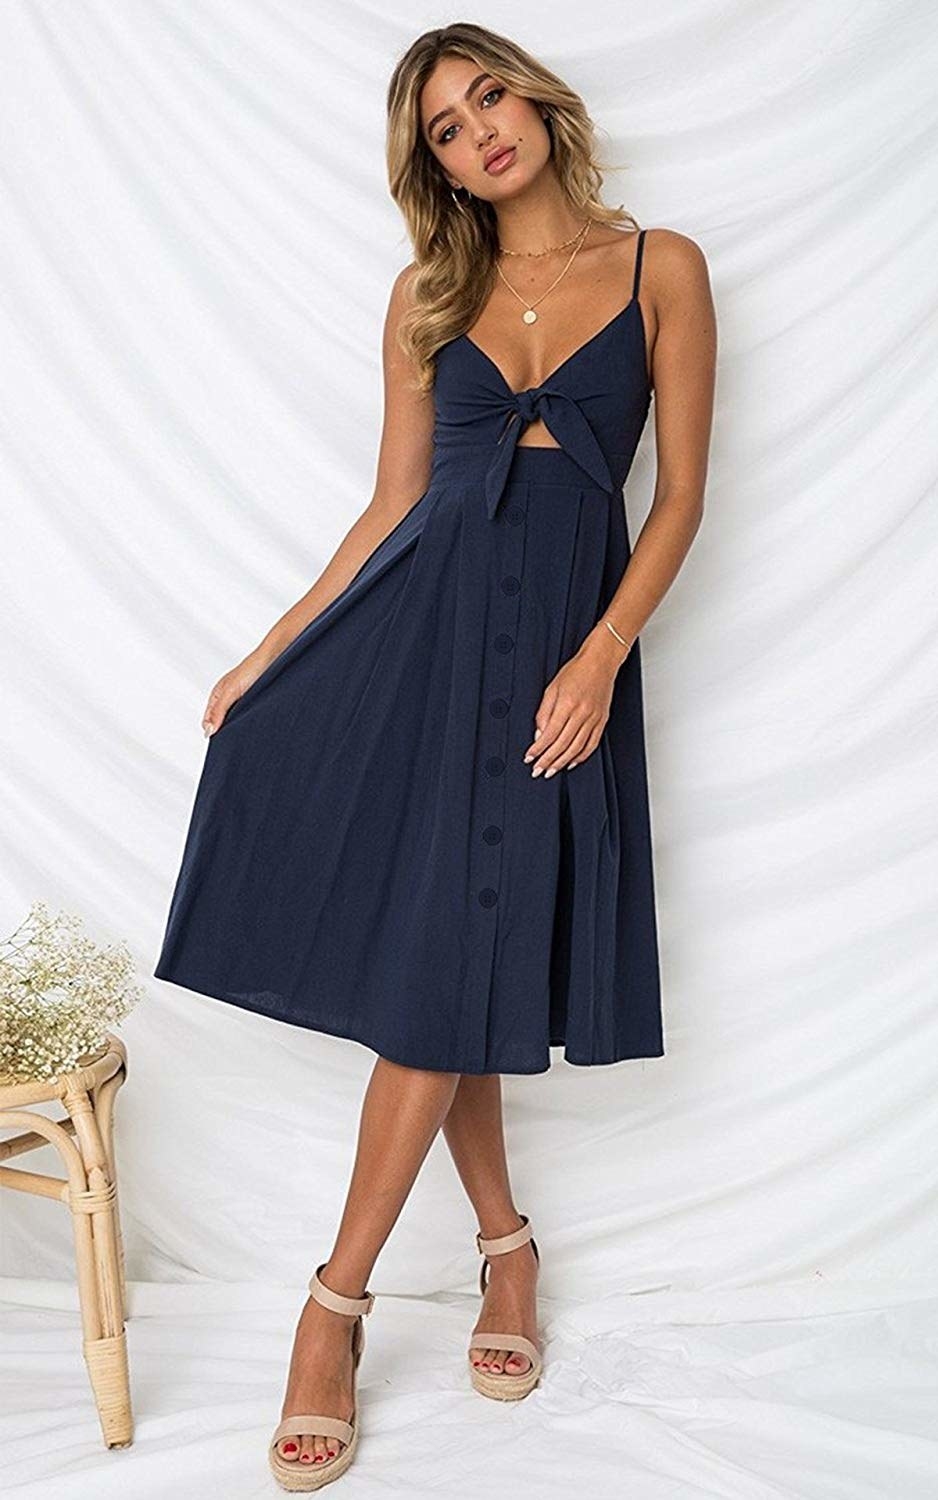 27 Of The Best Summer Dresses You Can Get On Amazon